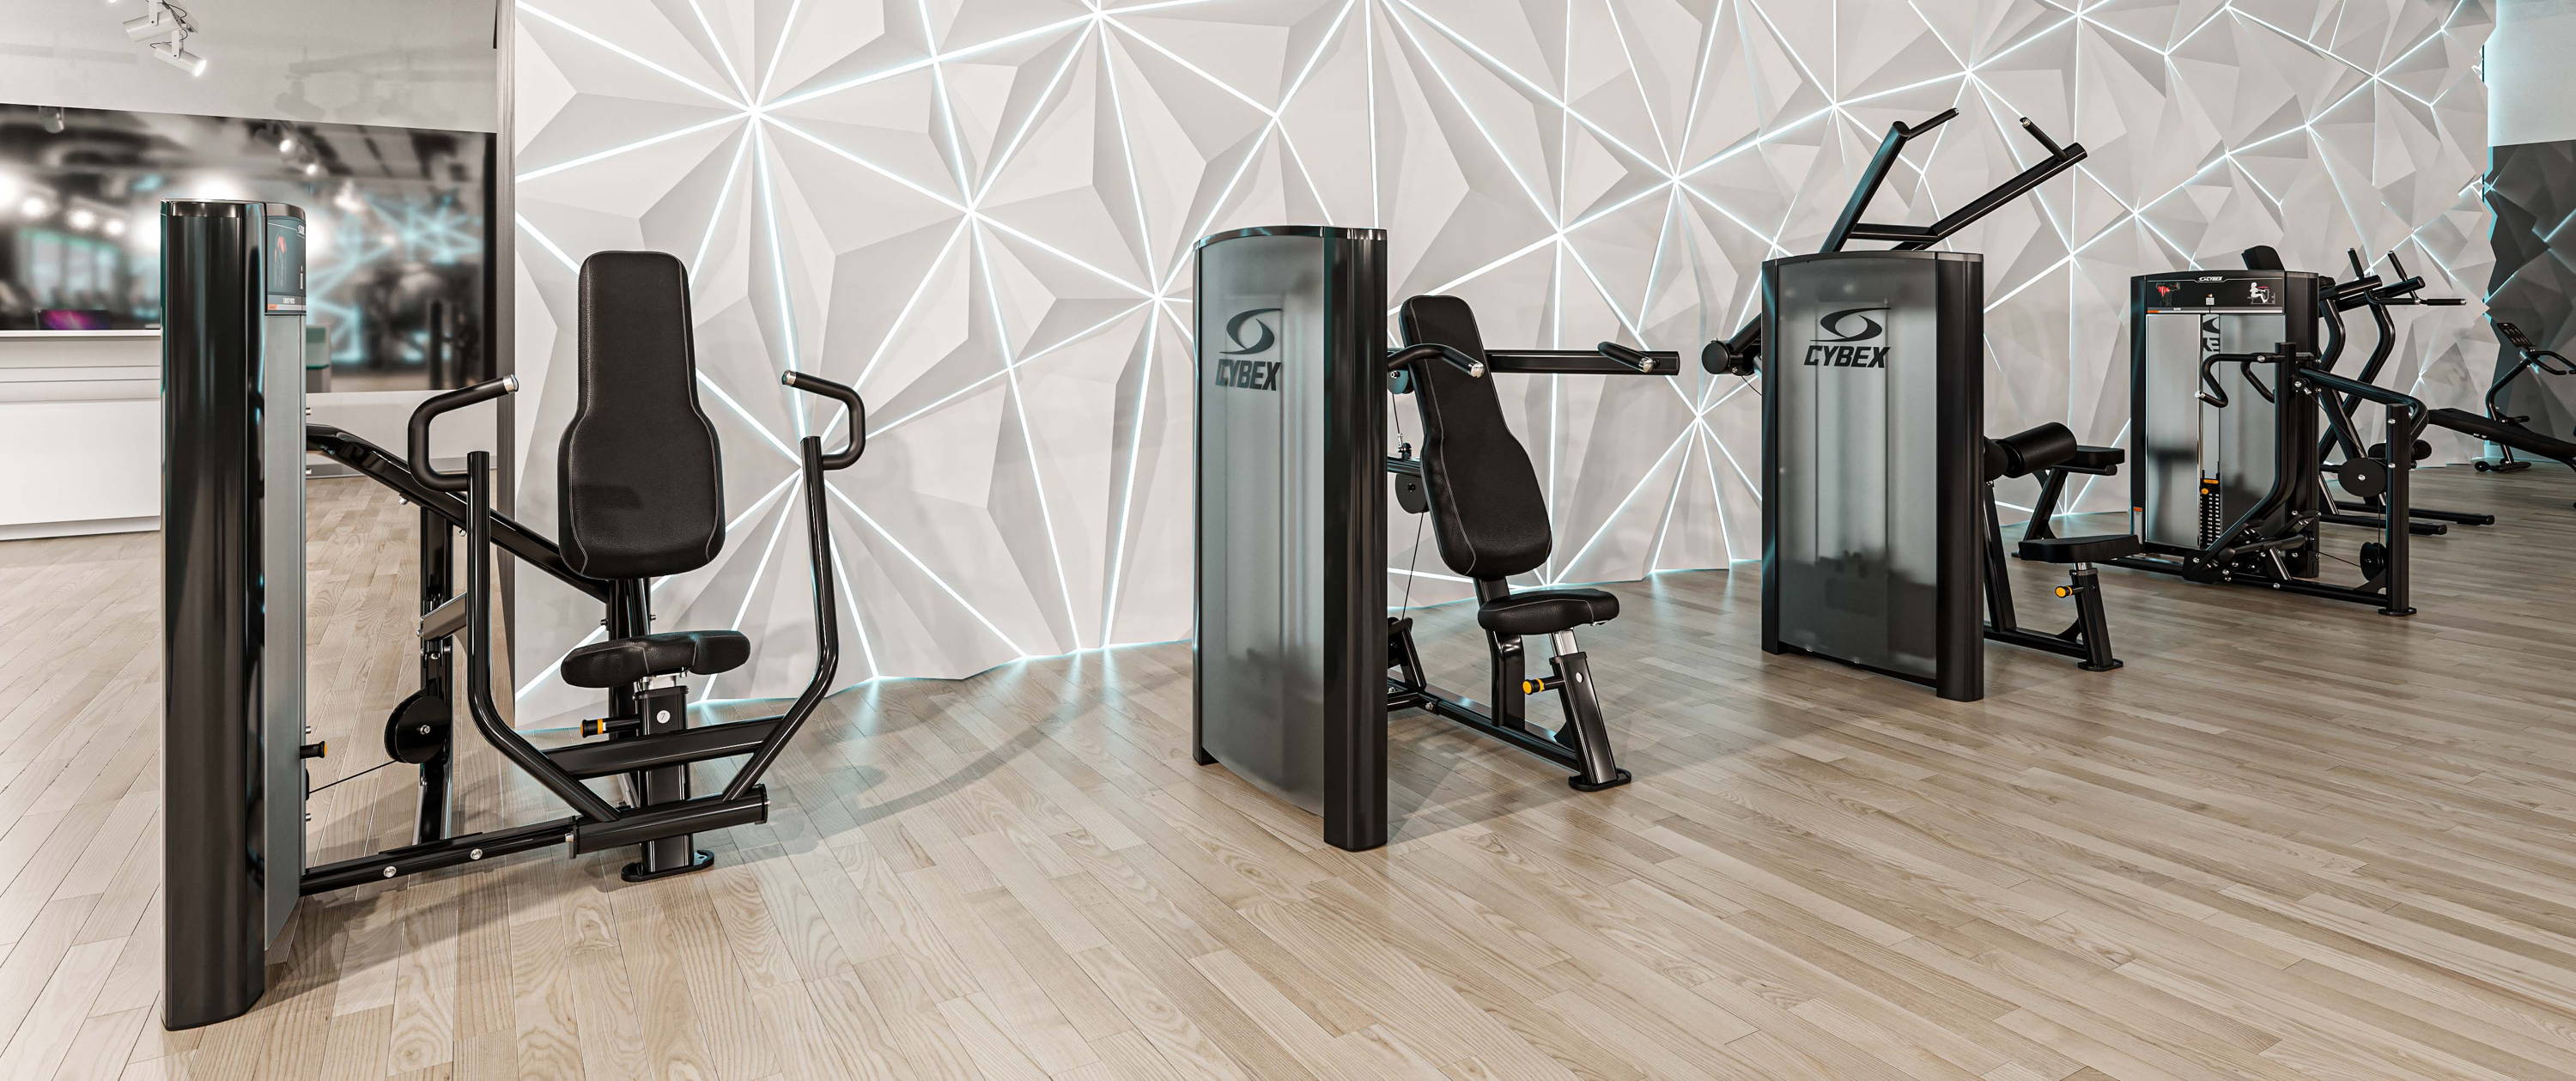 Cybex Ion Series selectorized exercise machines lined up in gym, black frame / black upholstery